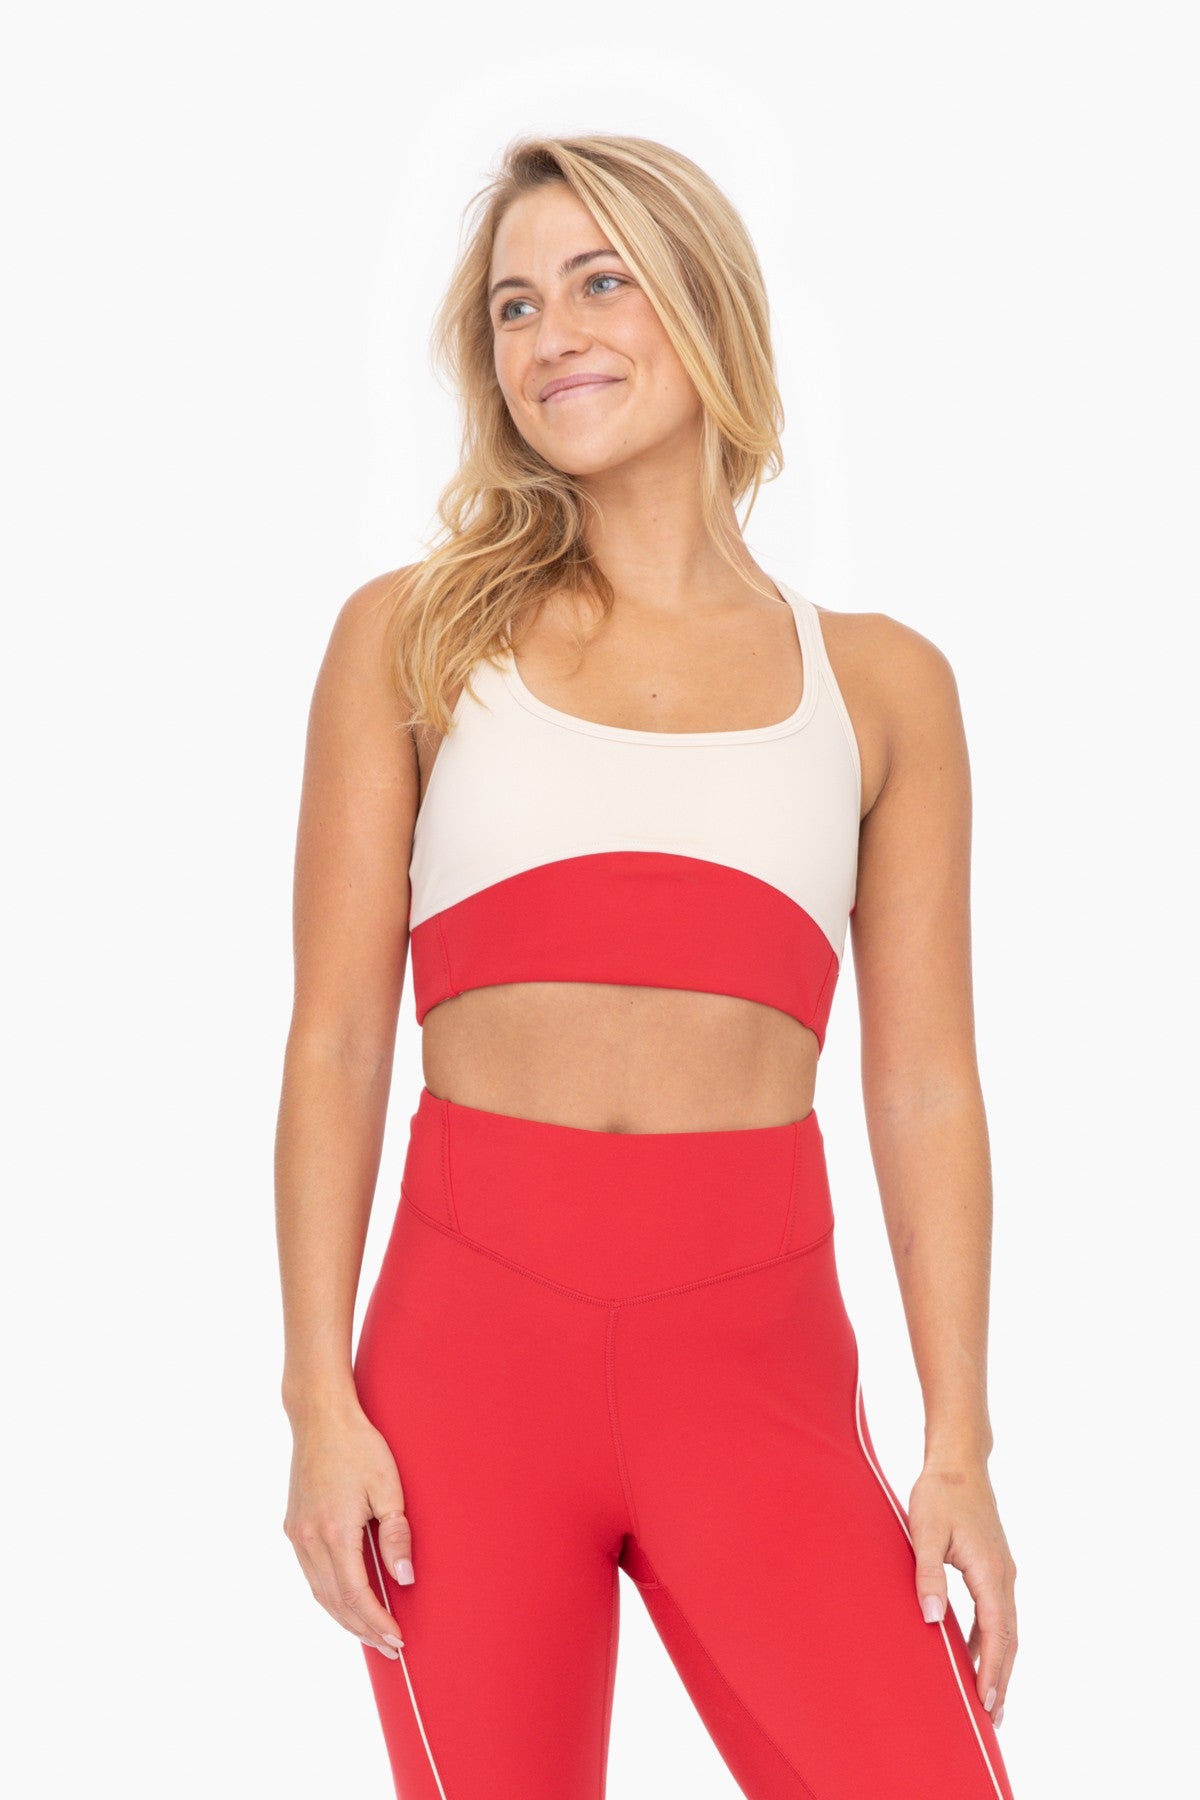 Red and Nude Open Back Color Block Sports Bra